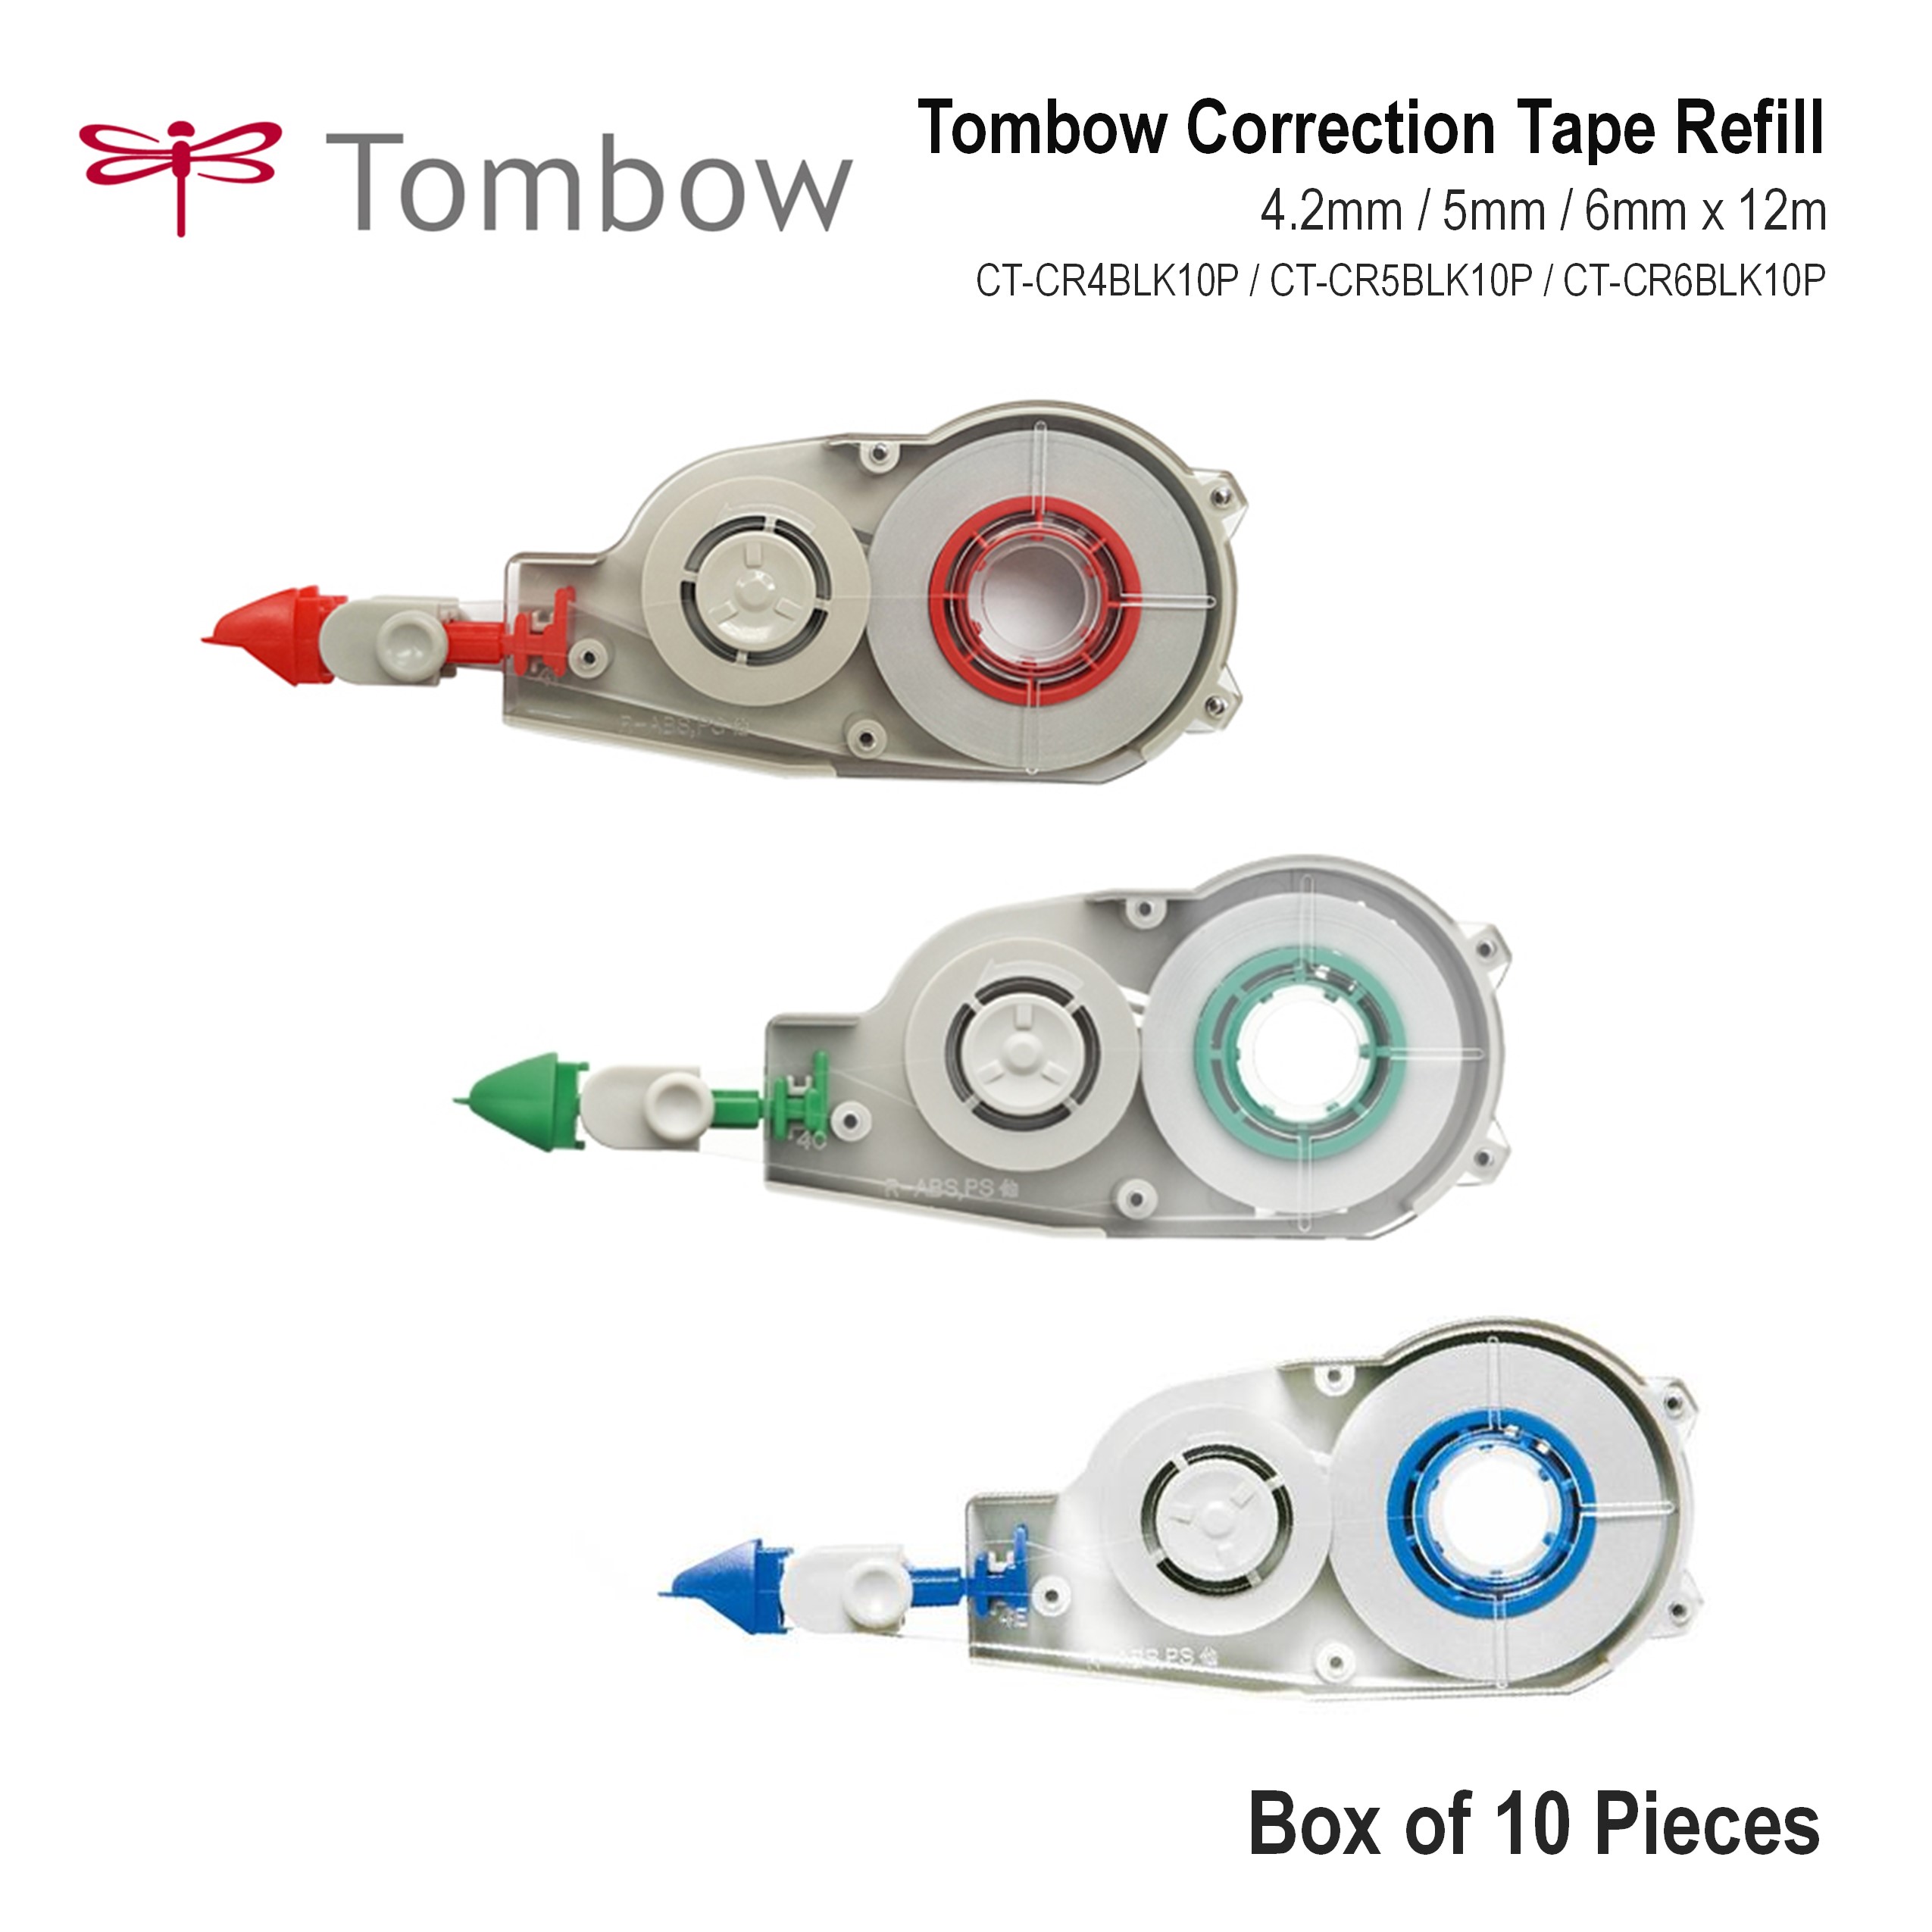 Tombow Correction Tape - Best Price in Singapore | Lazada.sg